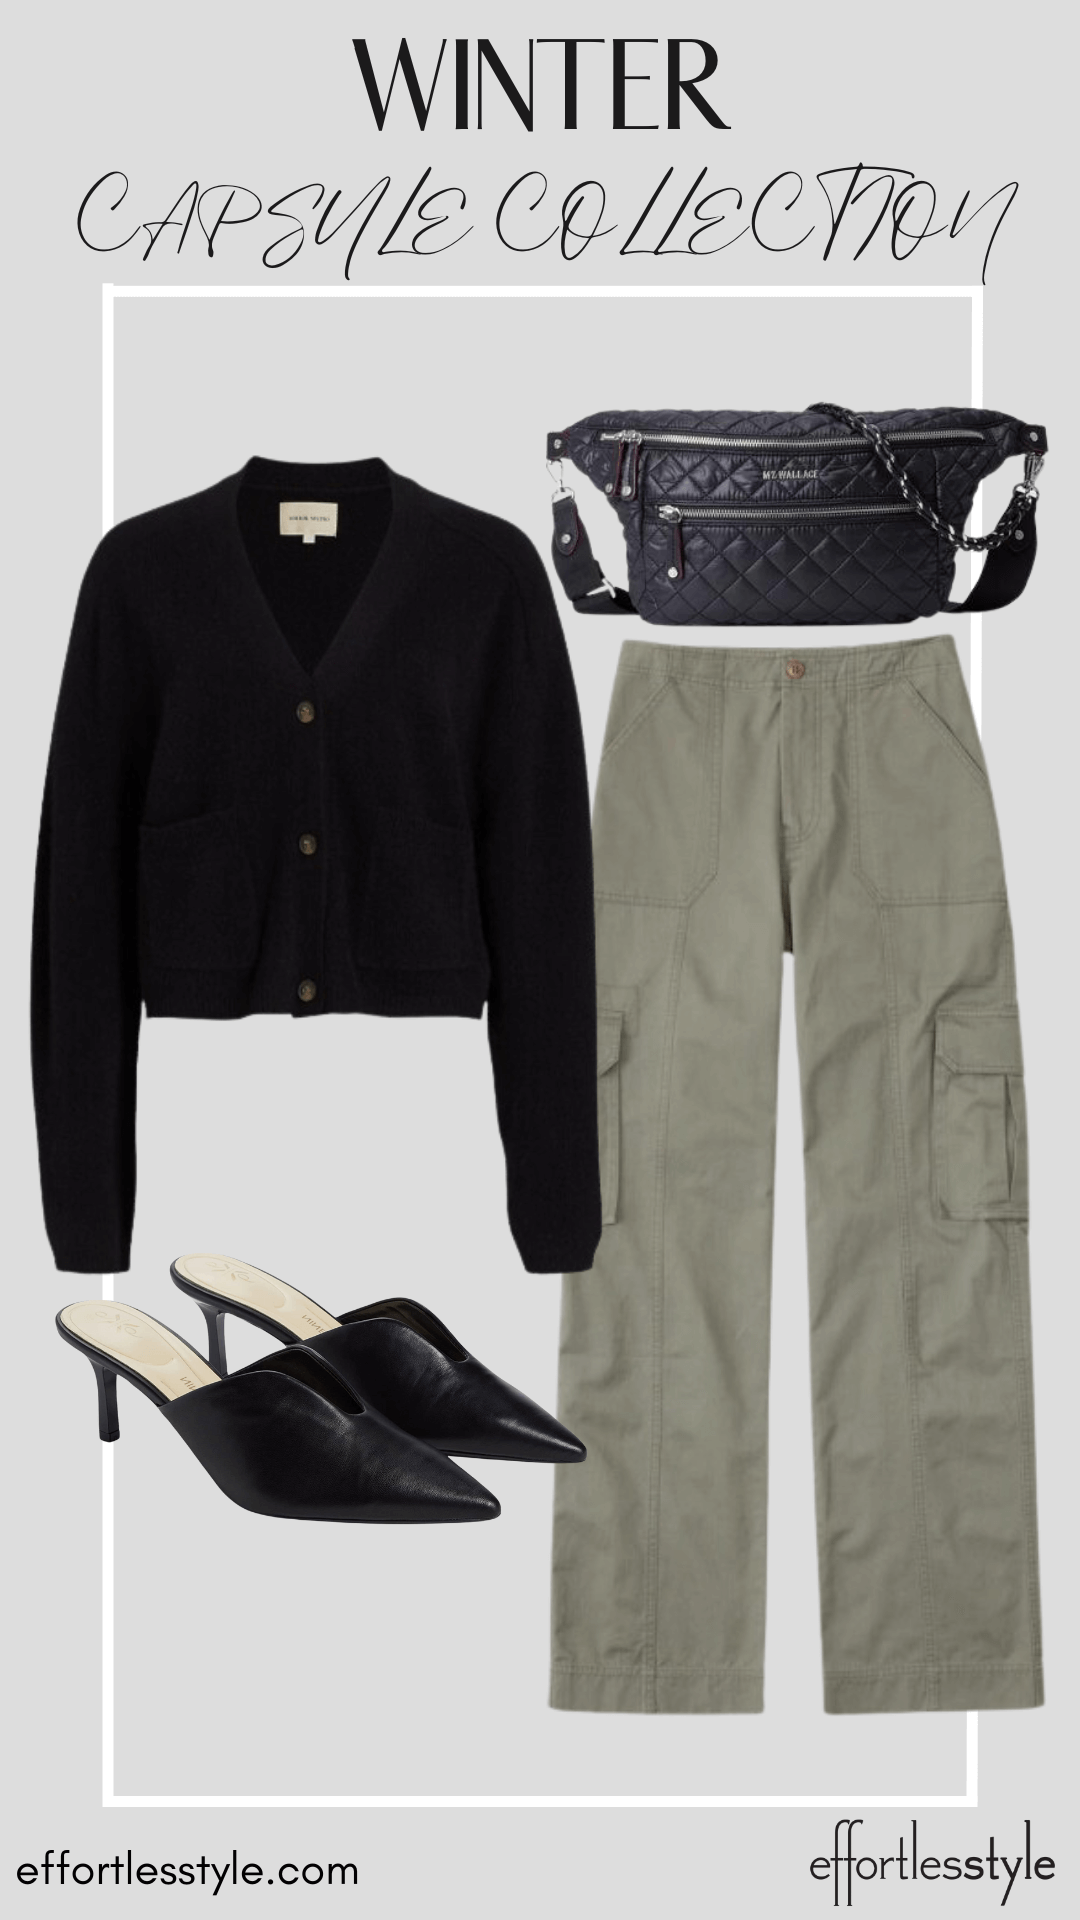 How To Wear Our Winter Capsule Wardrobe - Part 2 Cropped Cardigan & Cargo Pants how to dress up cargo pants how to wear heels with cargo pants how to wear mules with cargo pants fun ways to style cargo pants for winter how to wear a cardigan and cargo pants